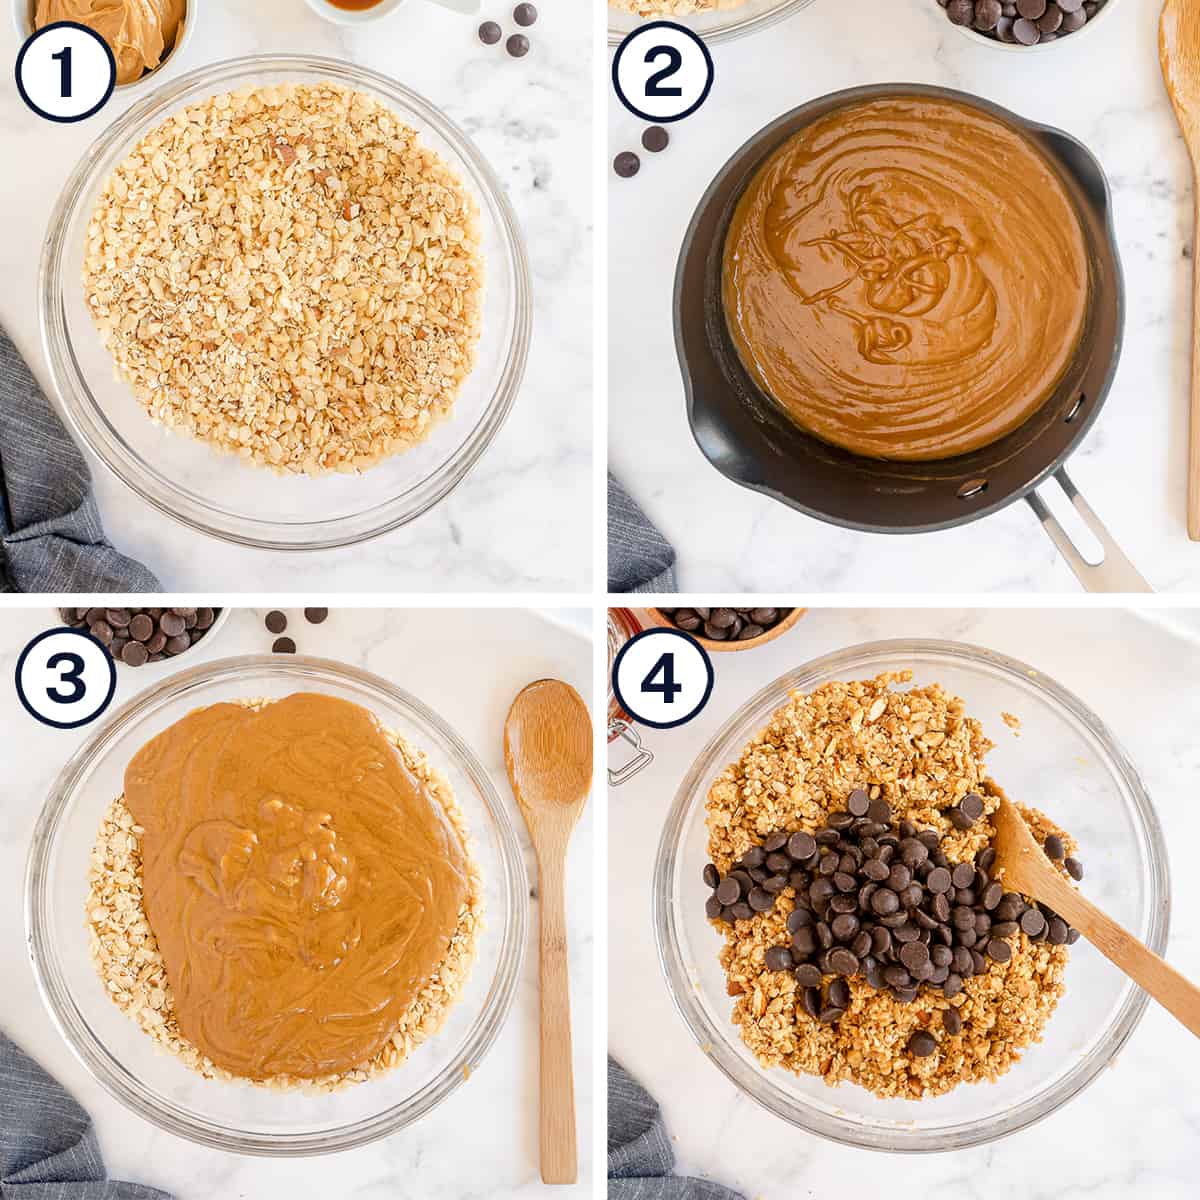 Rice krispies and oats in a bowl and a peanut butter mixture in a saucepan are combined.